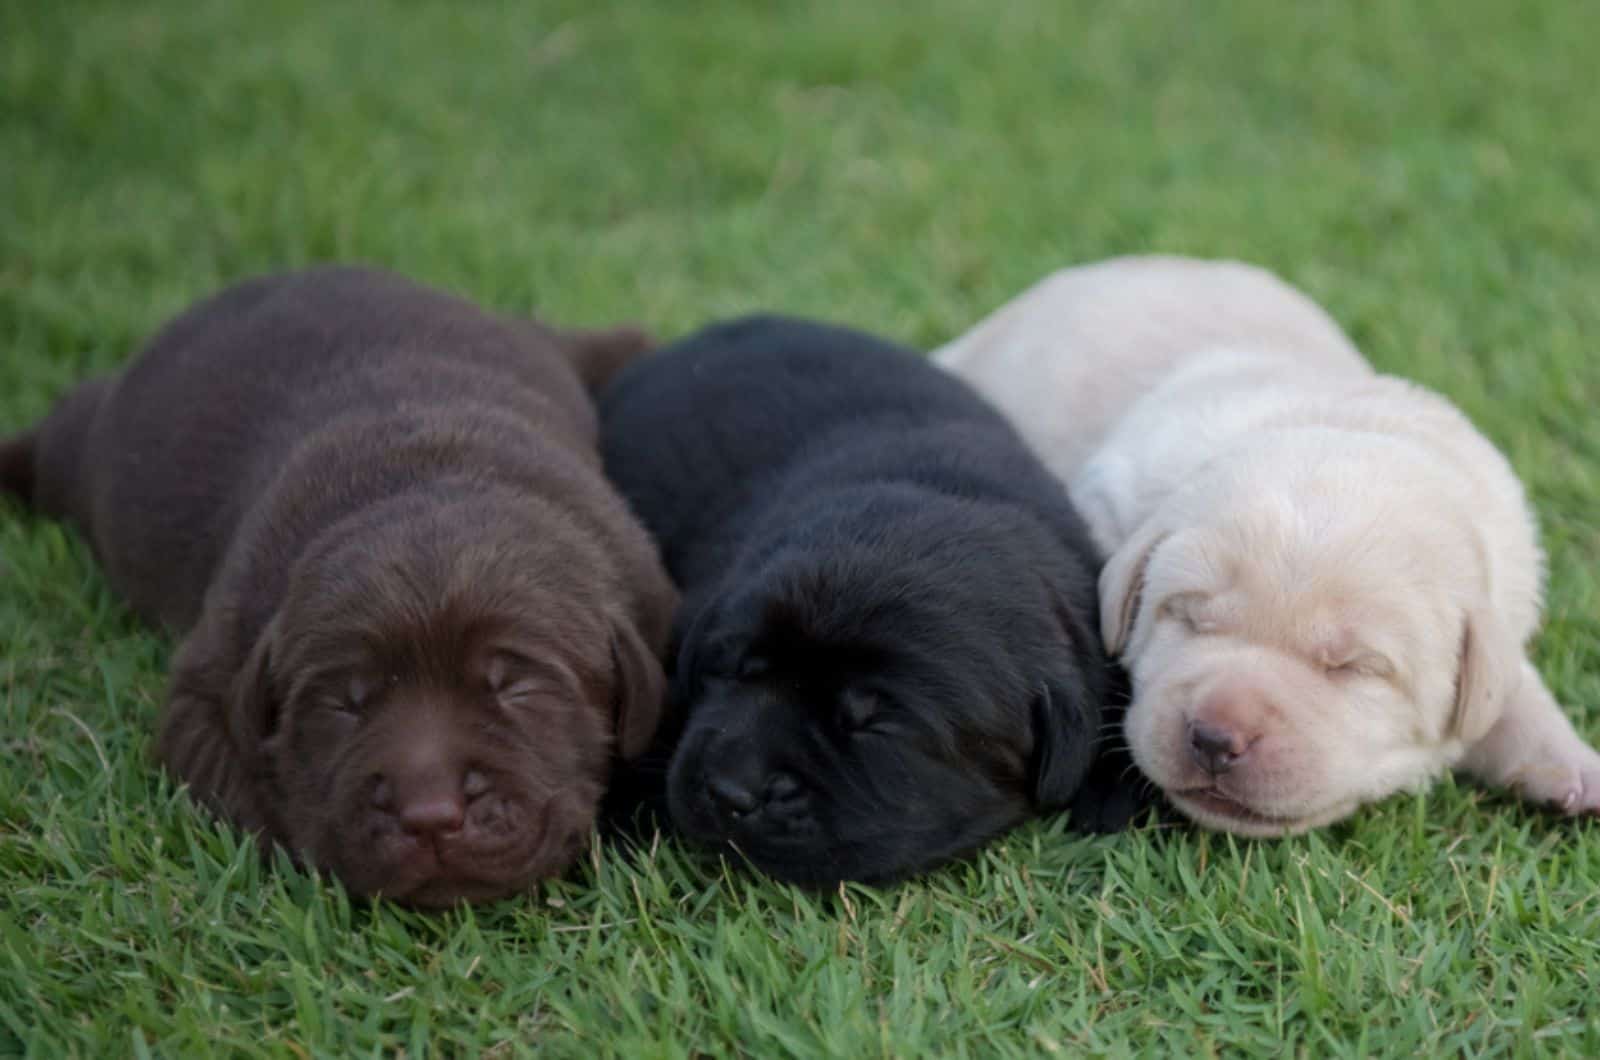 three labrador puppies sleeping together on the lawn